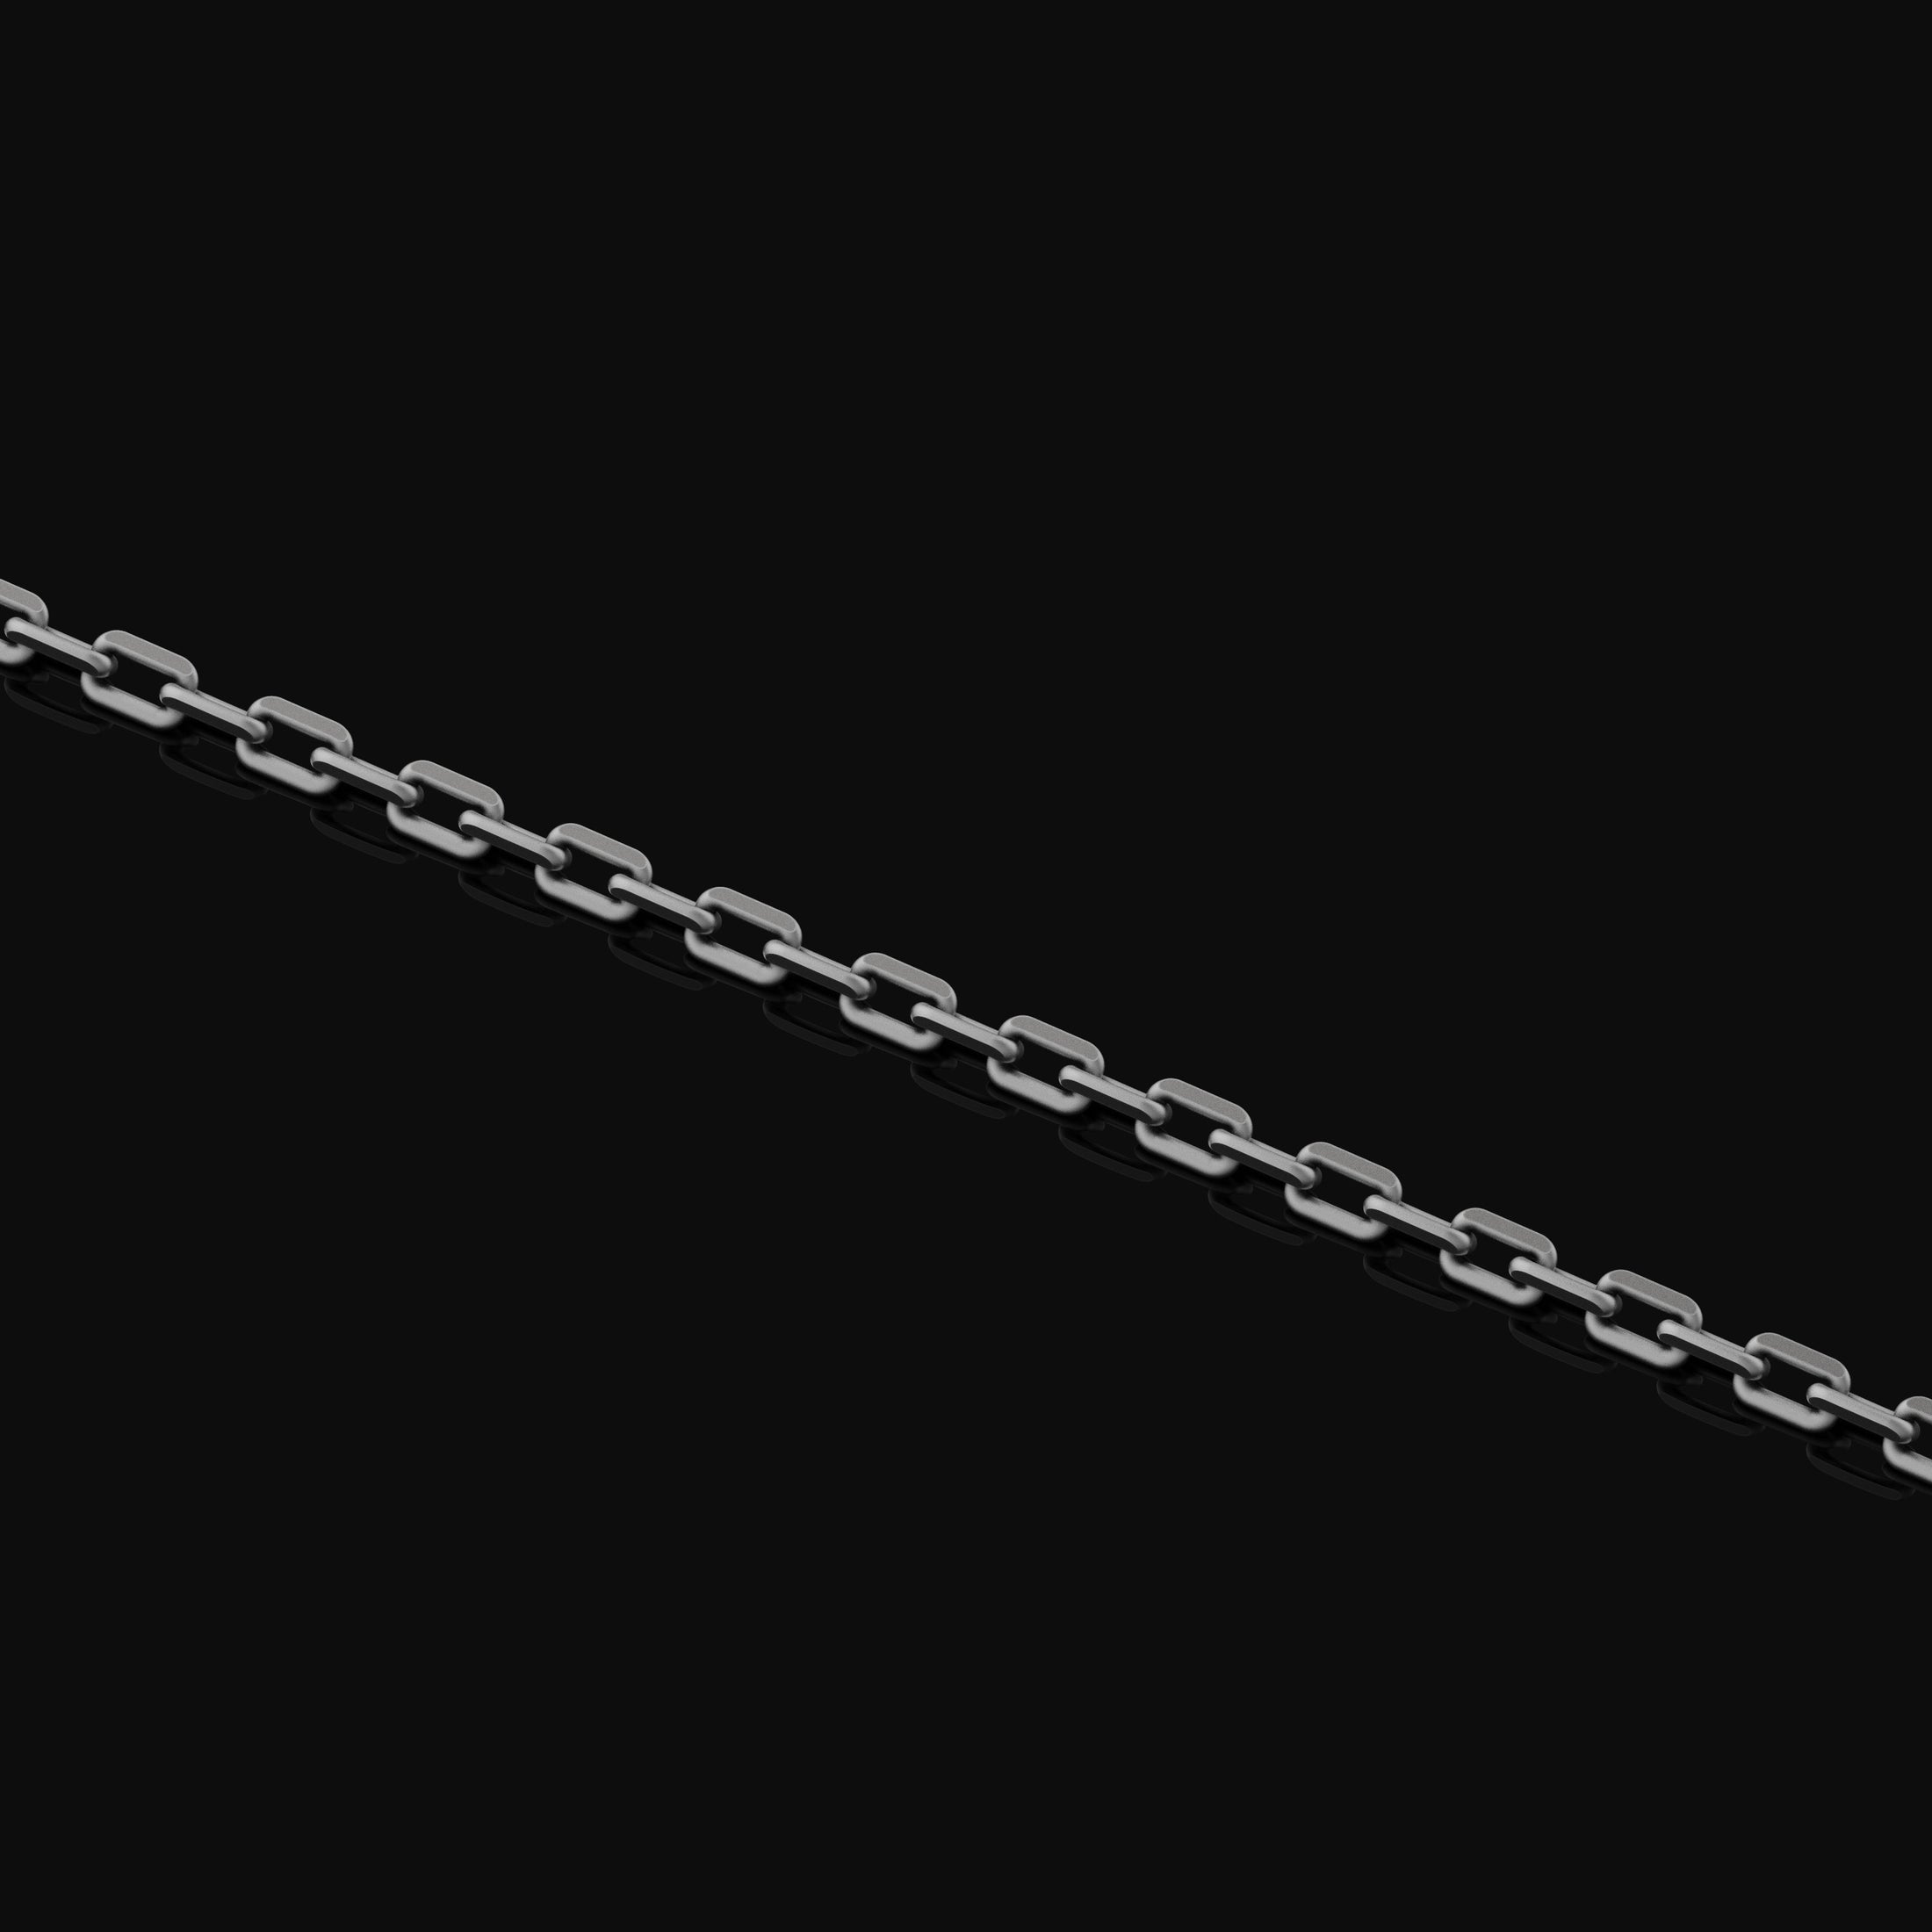 Silver Cable Link Chain